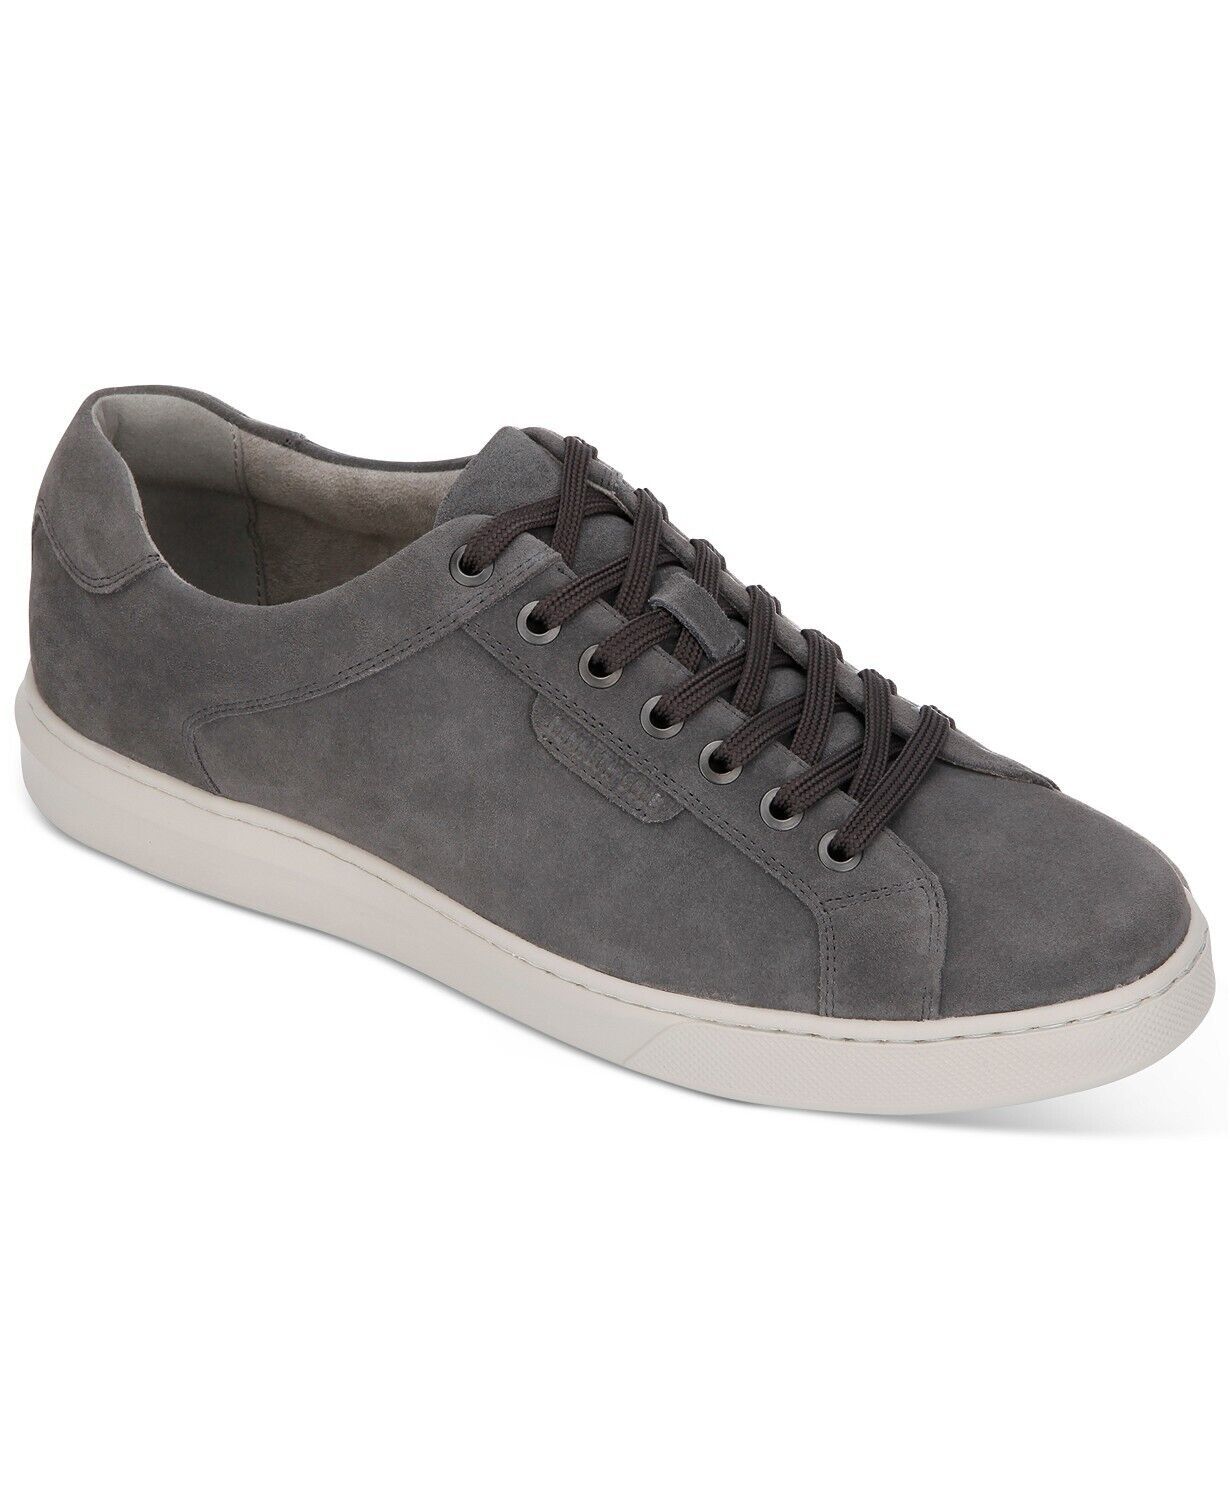 Kenneth Cole Men Casual Tennis Sneakers Liam Sneaker Size US 8.5M Grey Suede - $30.88